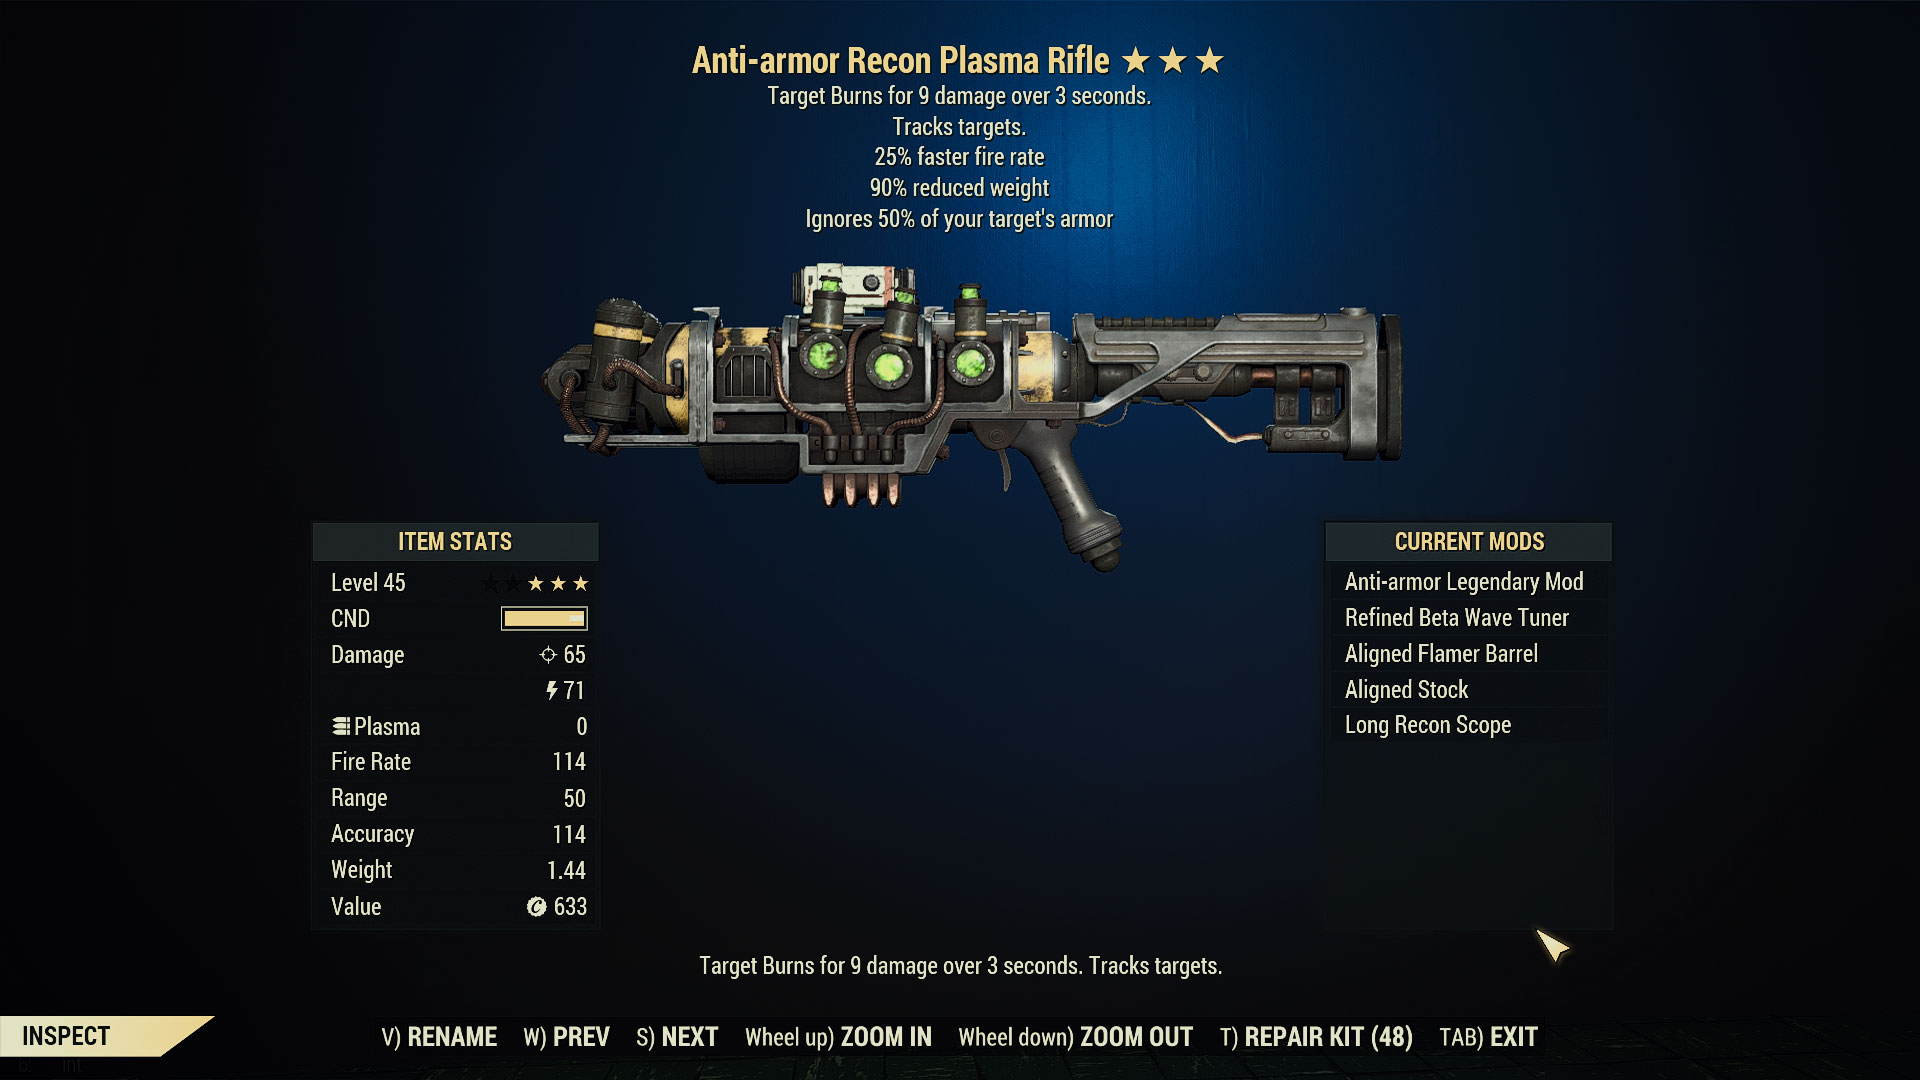 Anti-armor PLasma Rifle (25% faster fire rate/90% reduced weight)